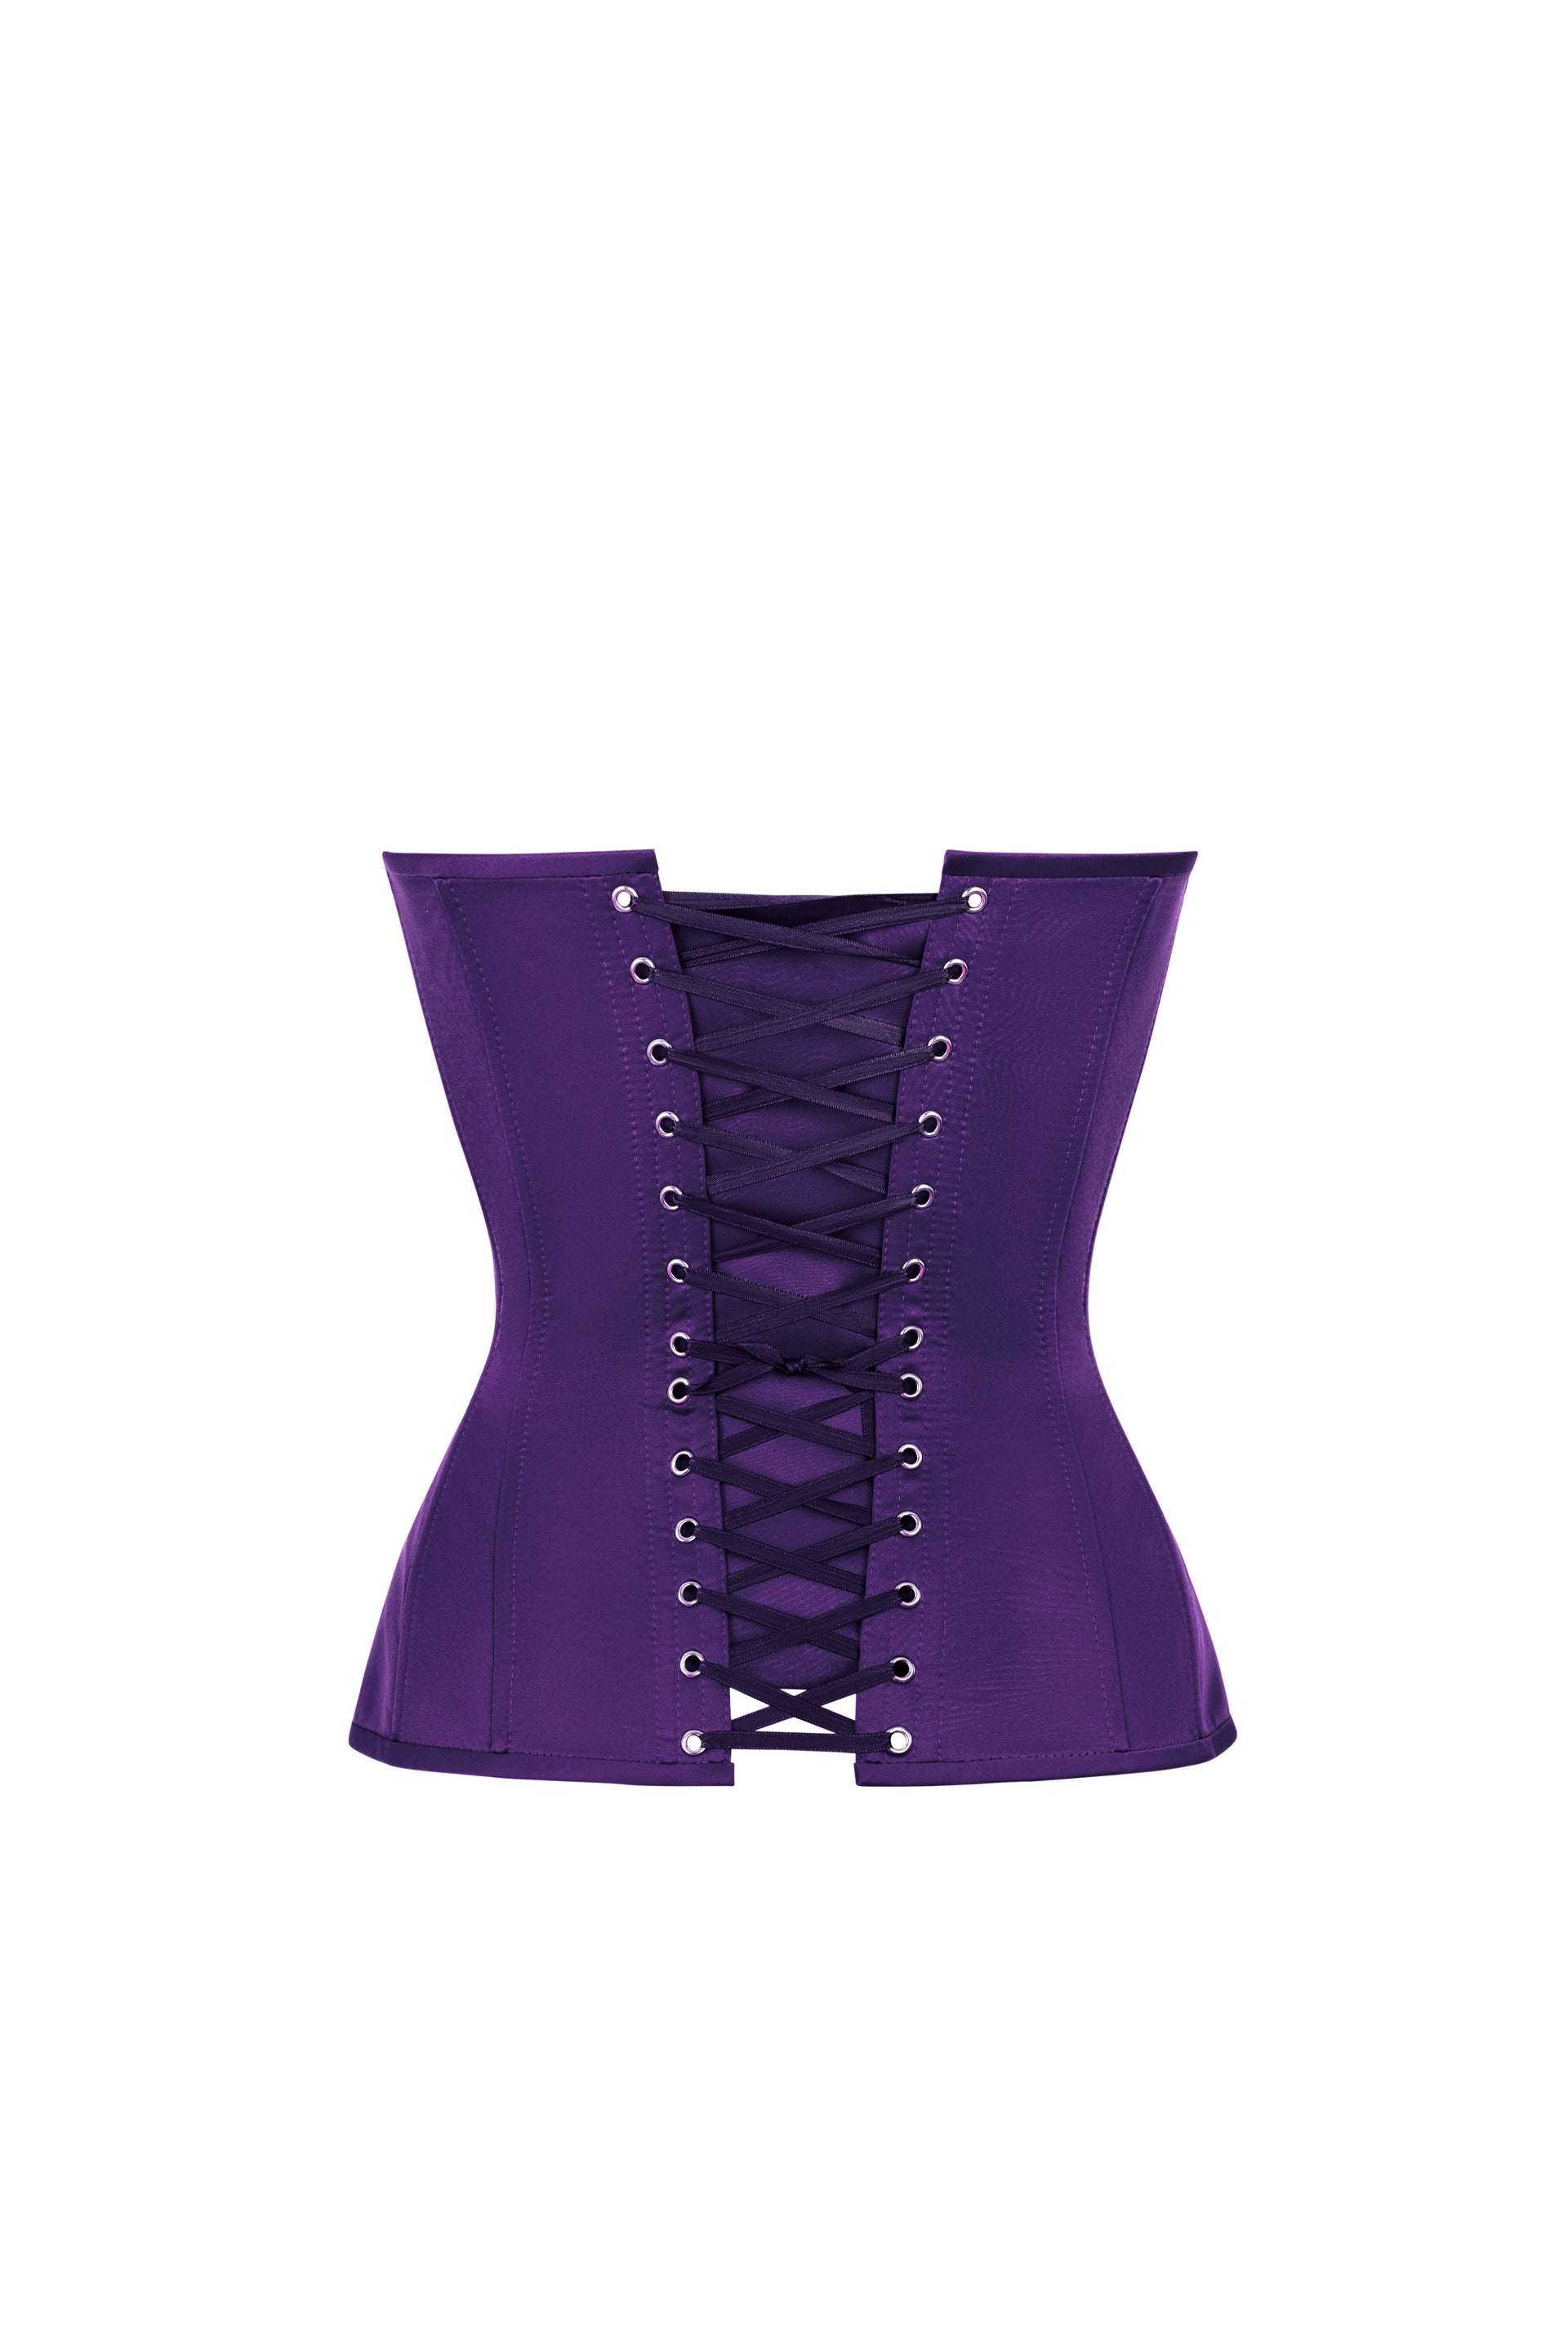 Purple satin corset with cups